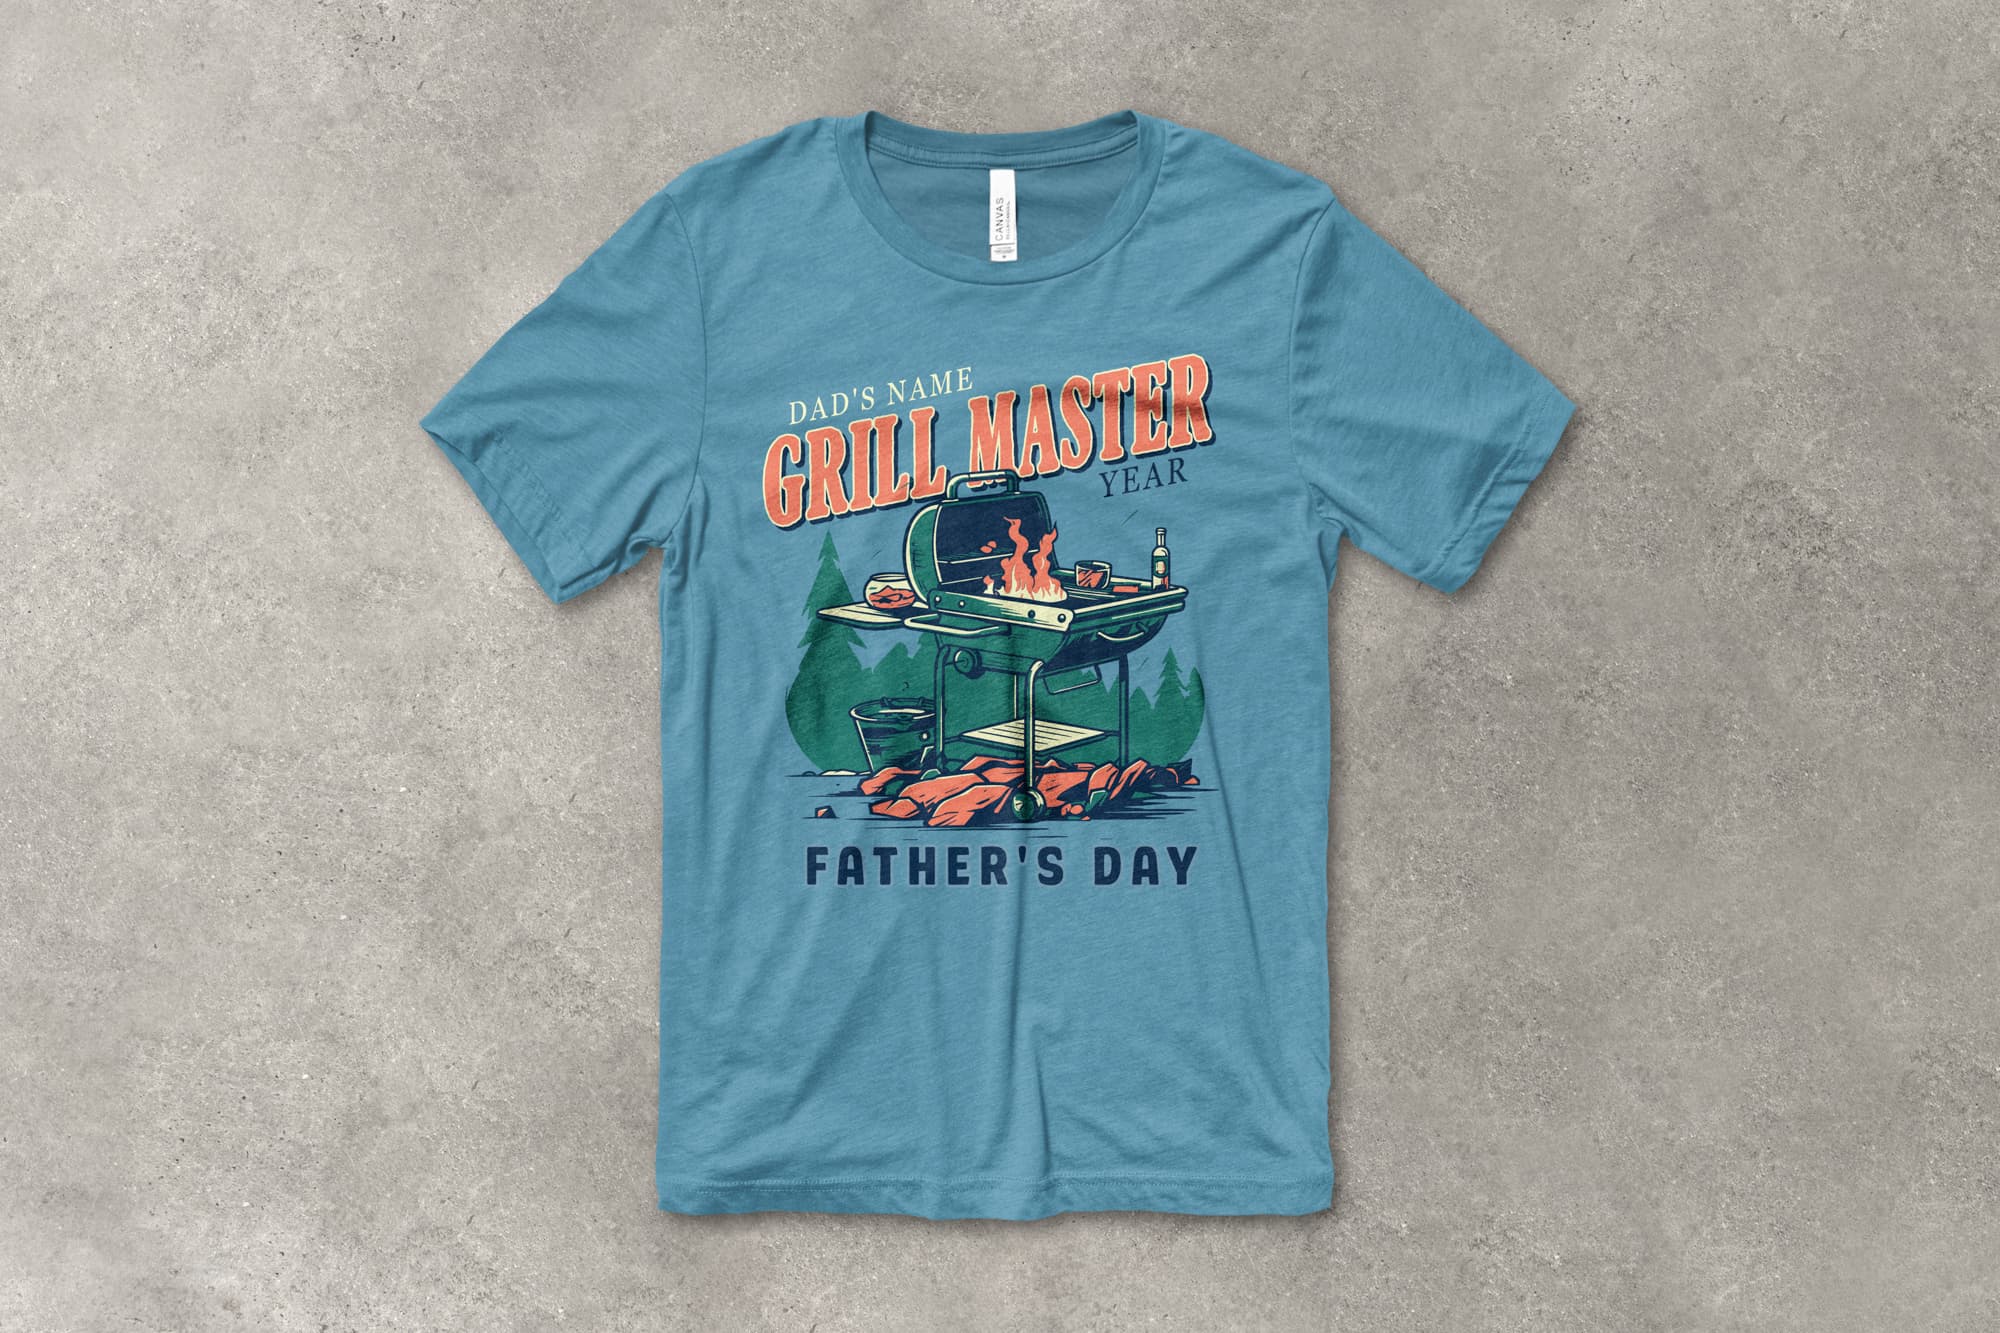 A flat t-shirt that has a customizable design that says "Grill Master - Father's Day" and features an illustration of a grill.